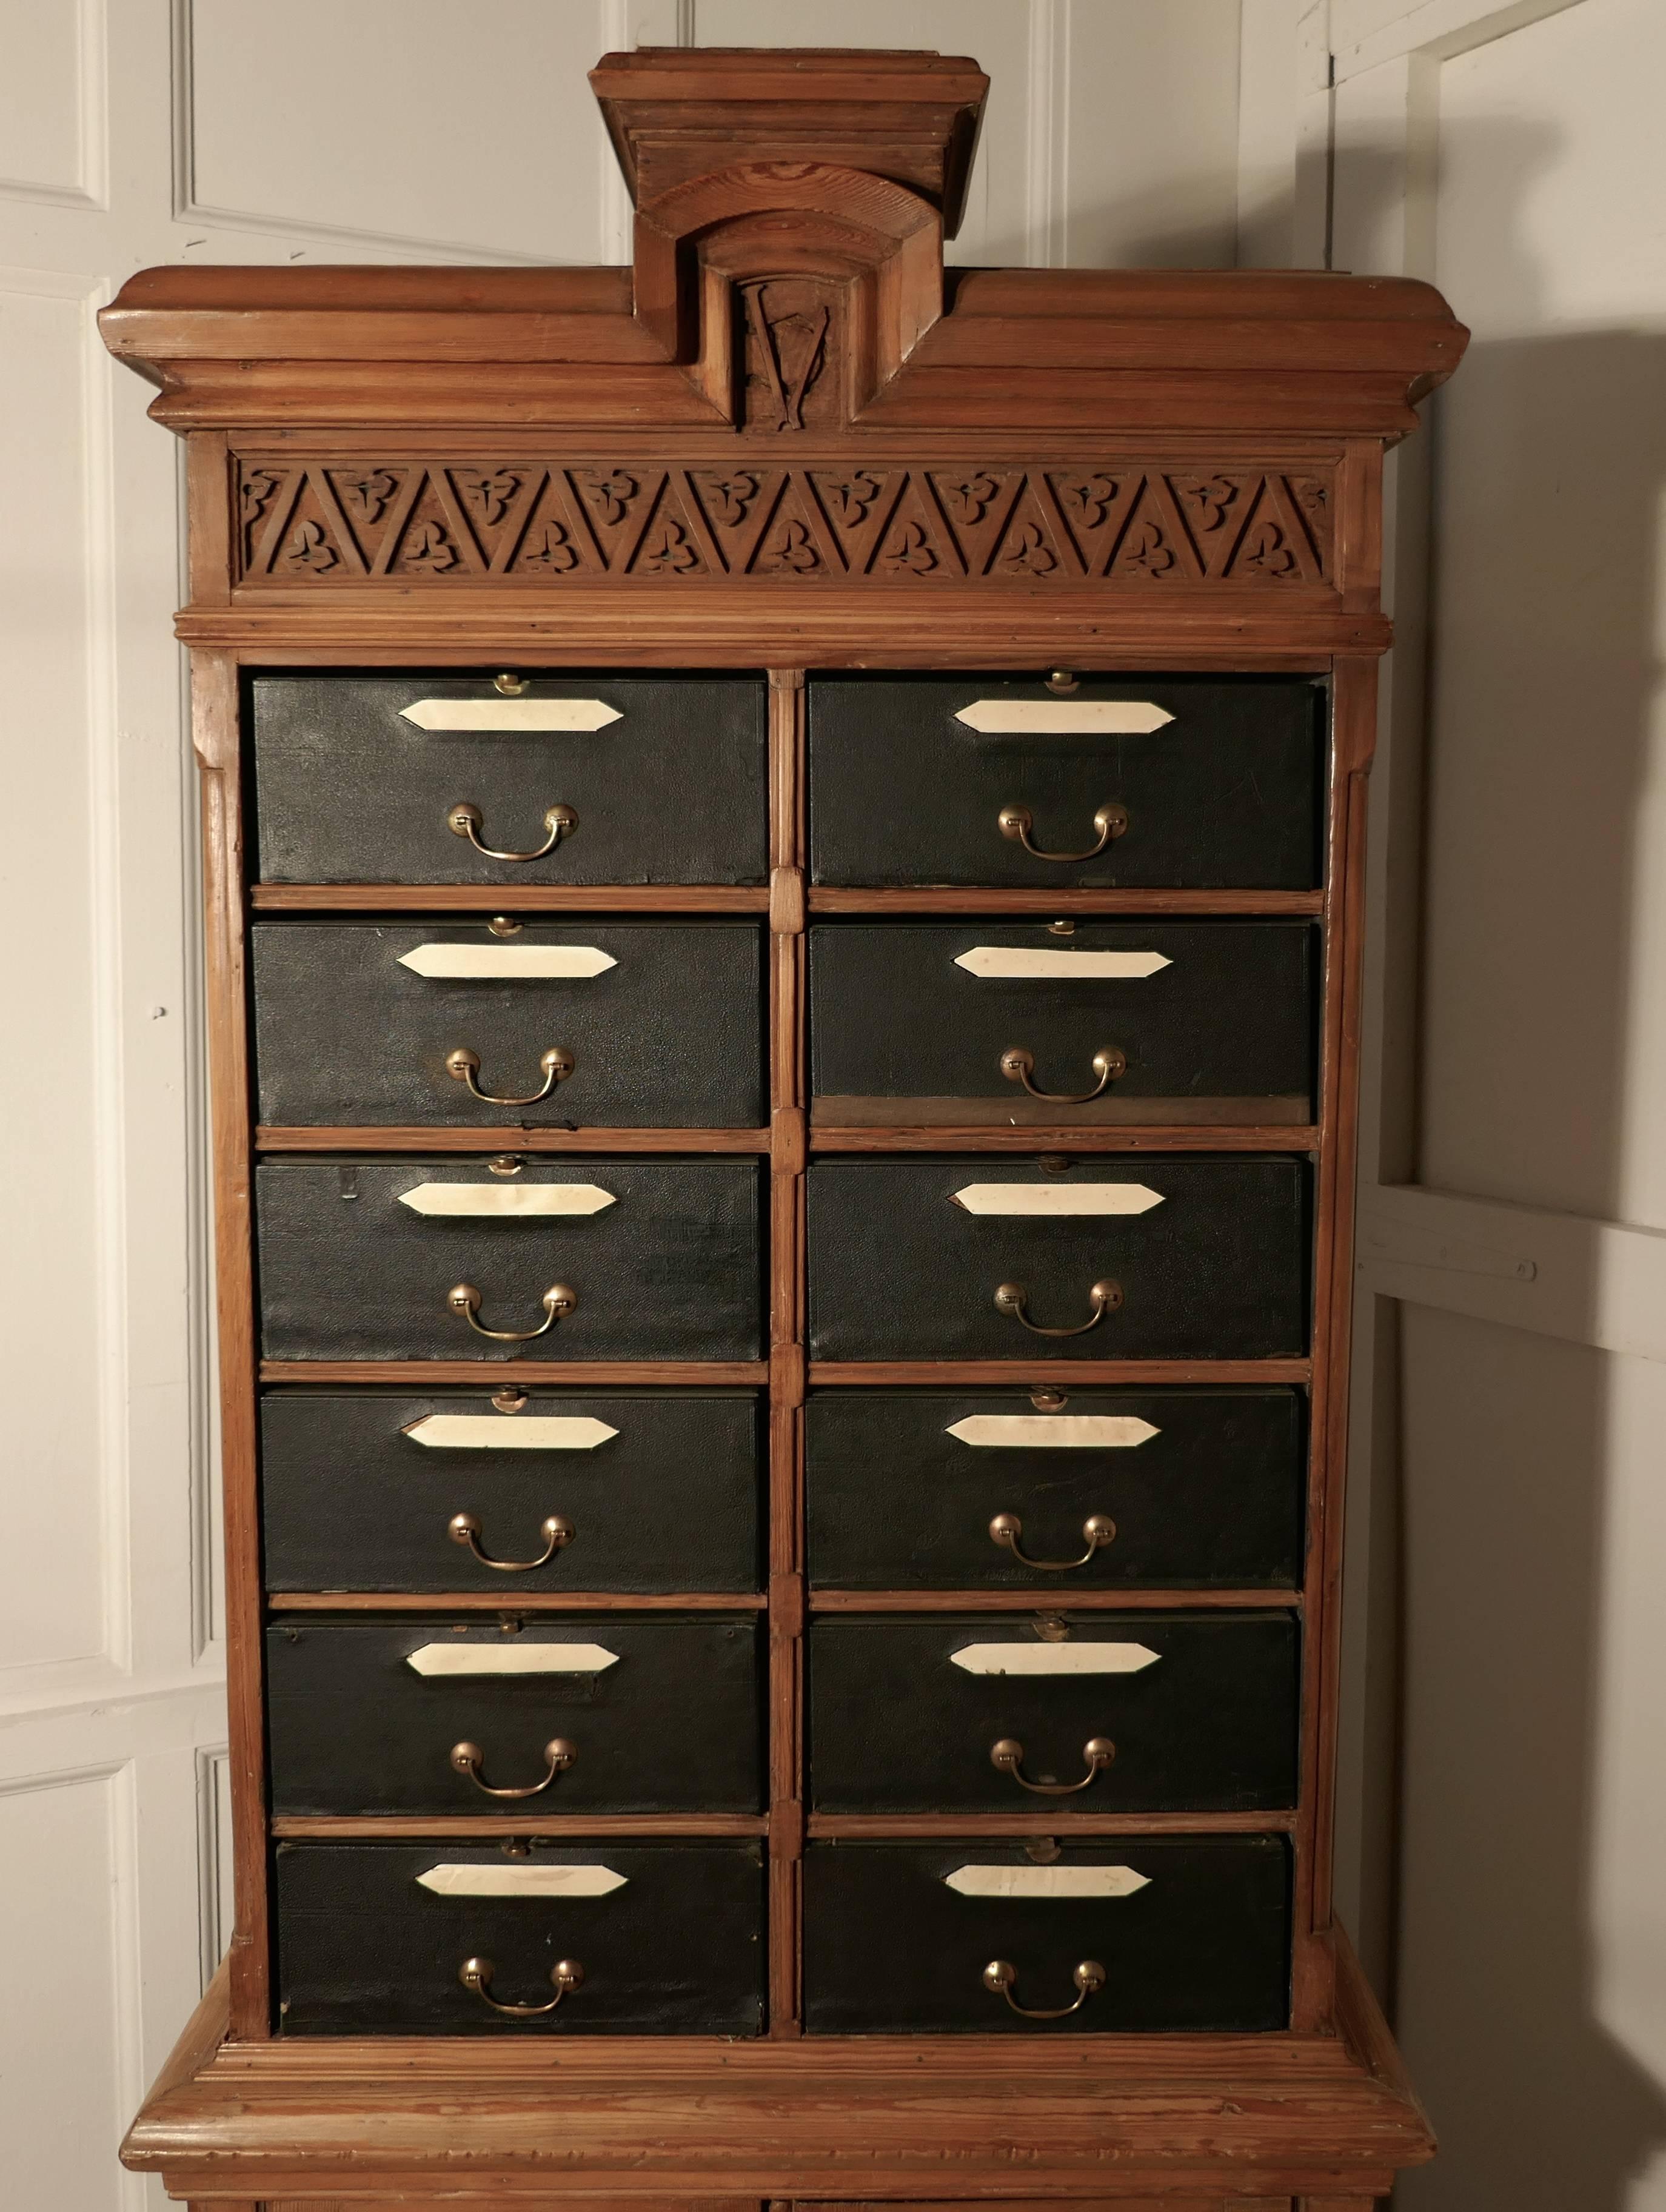 This is a traditional French Cartonniere, the top section holds 10 removable brass fitted box files.
The main body of the cabinet is made in pine and it has a two-door shelved cupboard at the bottom and it stands on bun feet
The files are good